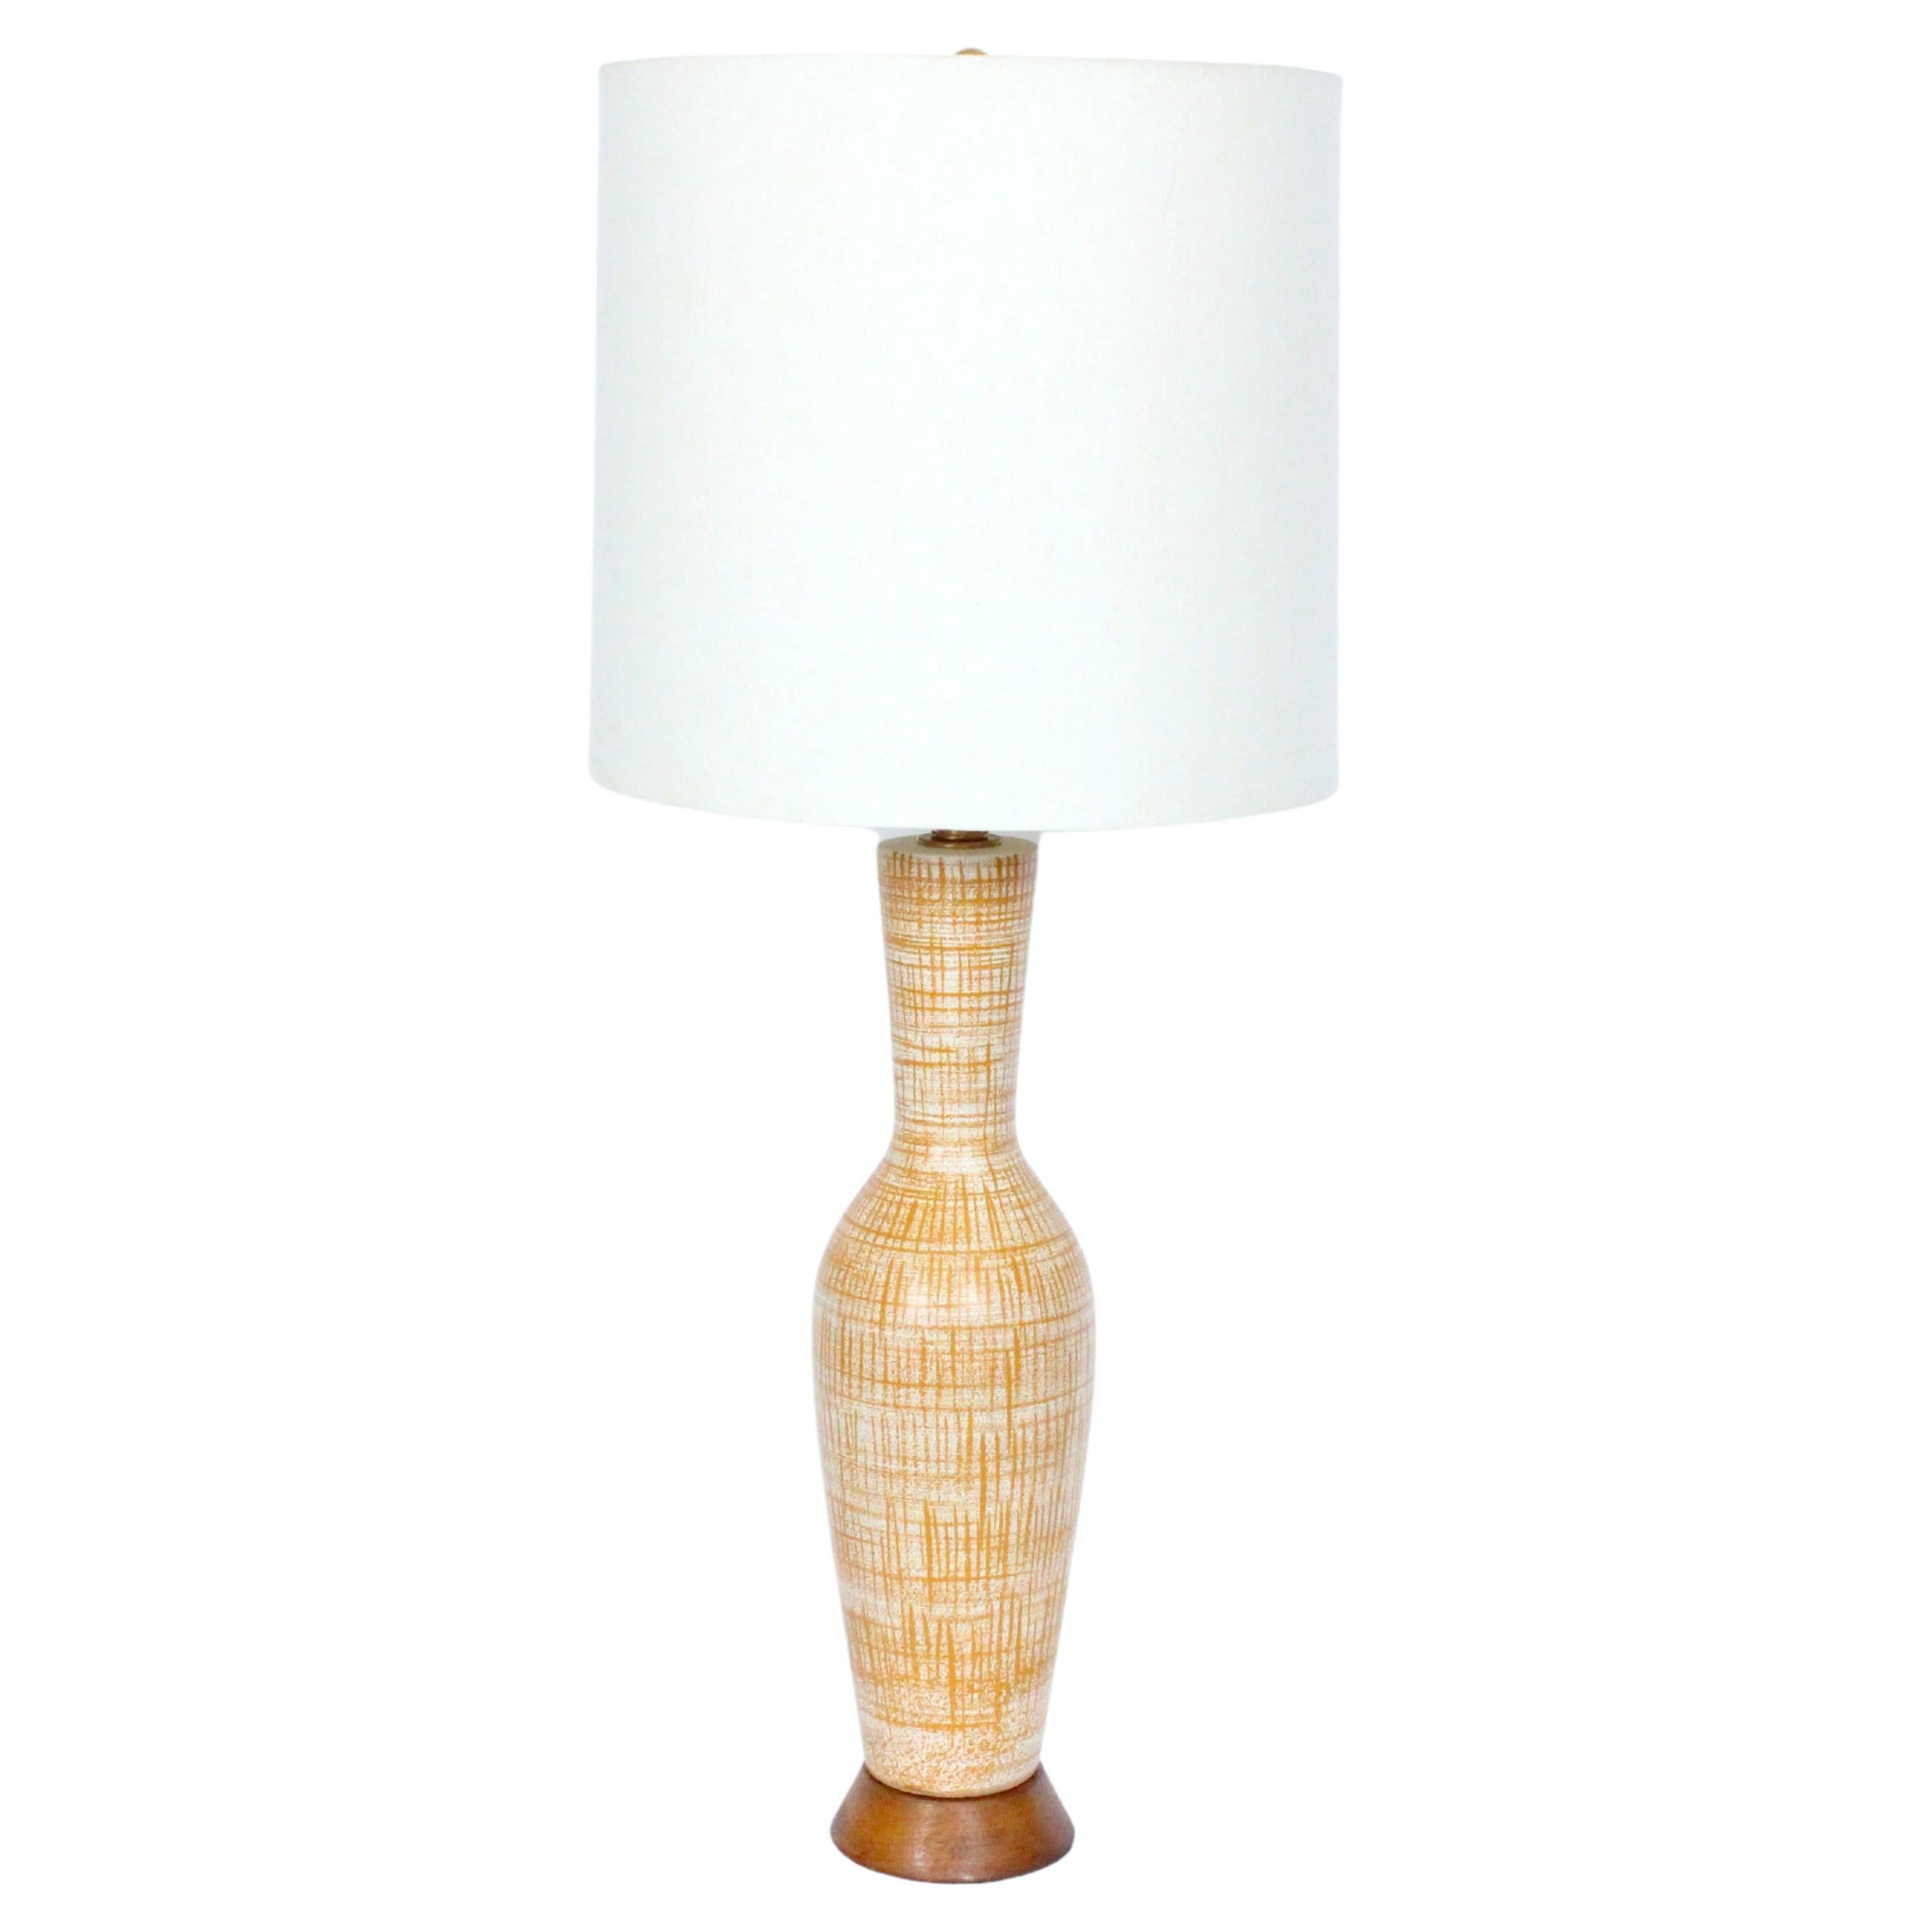 Tall Design Technics Pottery White Table Lamp with Woven Rust Pattern, 1950's For Sale